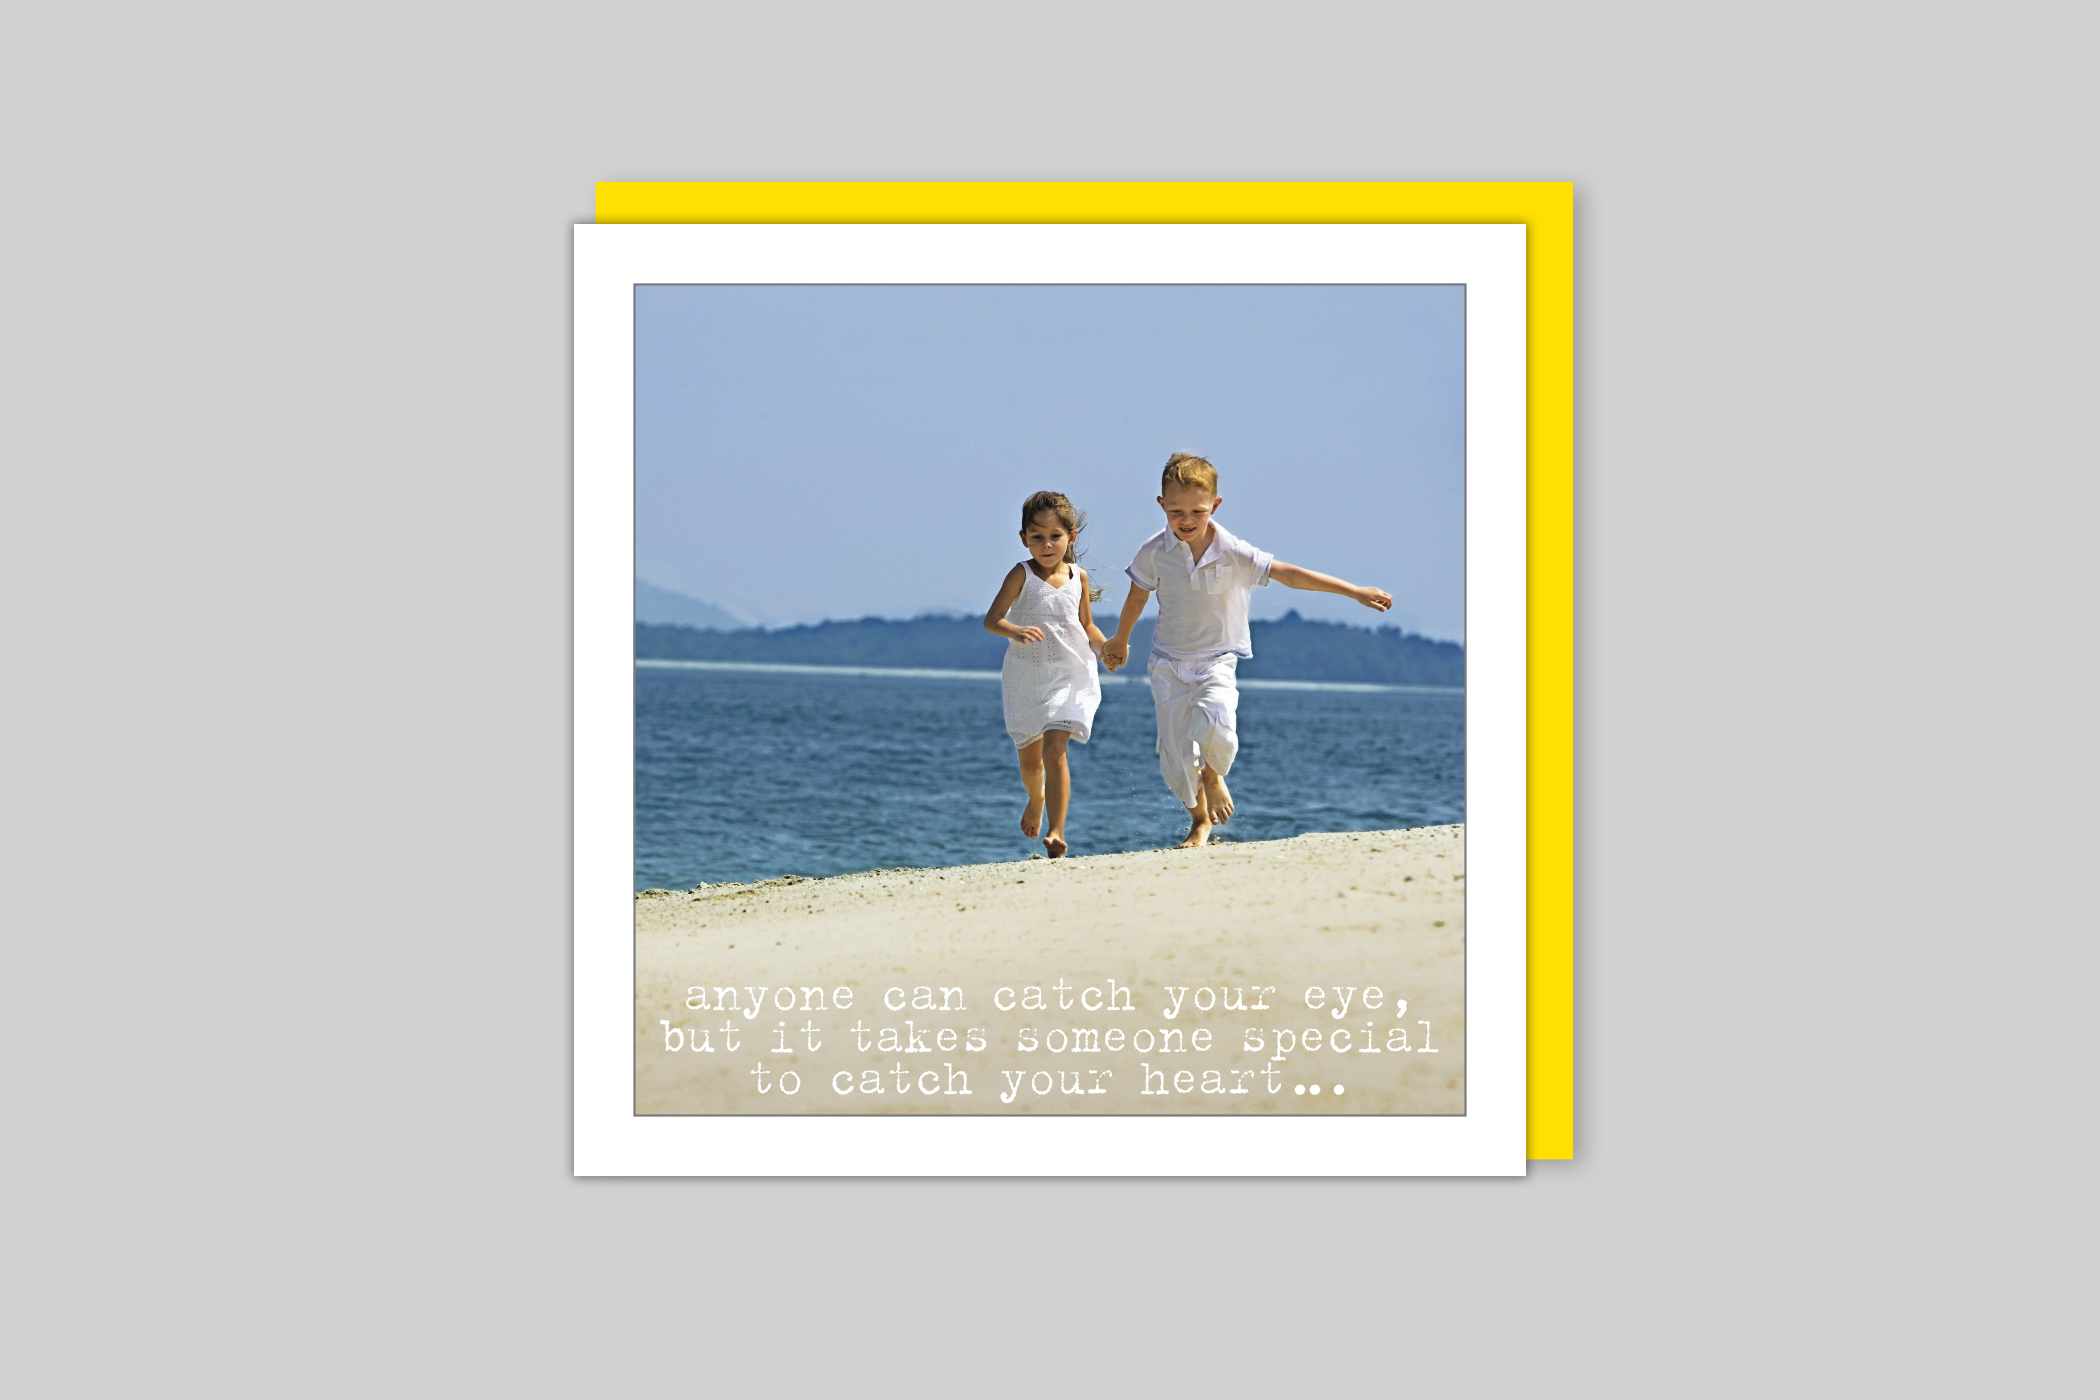 Catch Your Heart from Life Is Sweet range of greeting cards by Icon, back page.